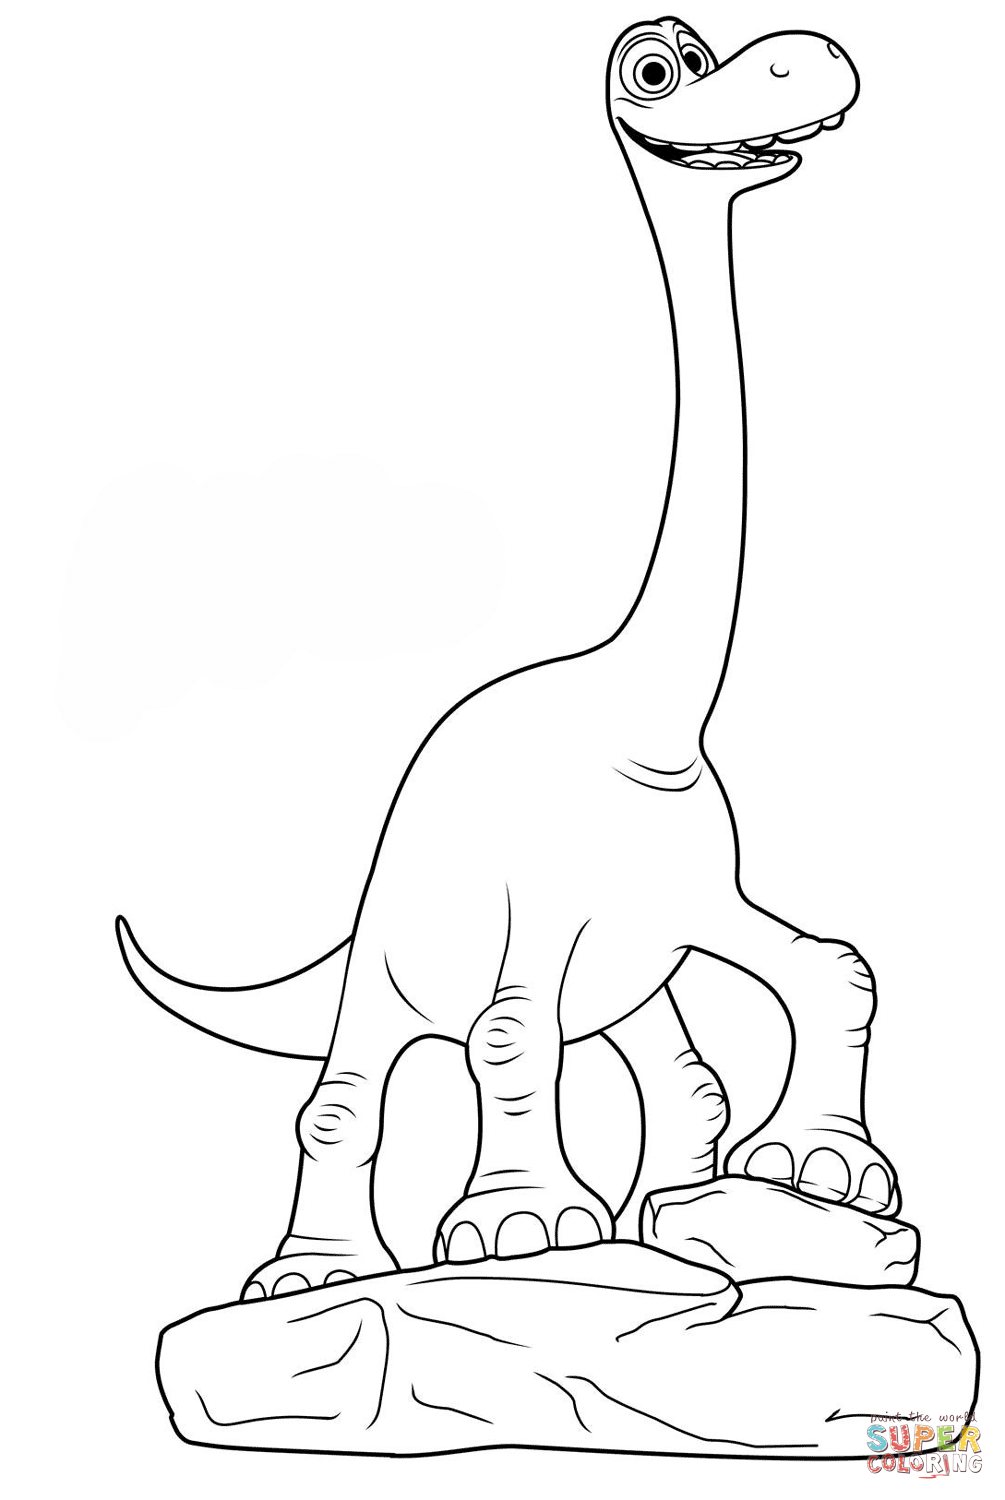 Arlo from The Good Dinosaur coloring page | Free Printable ...